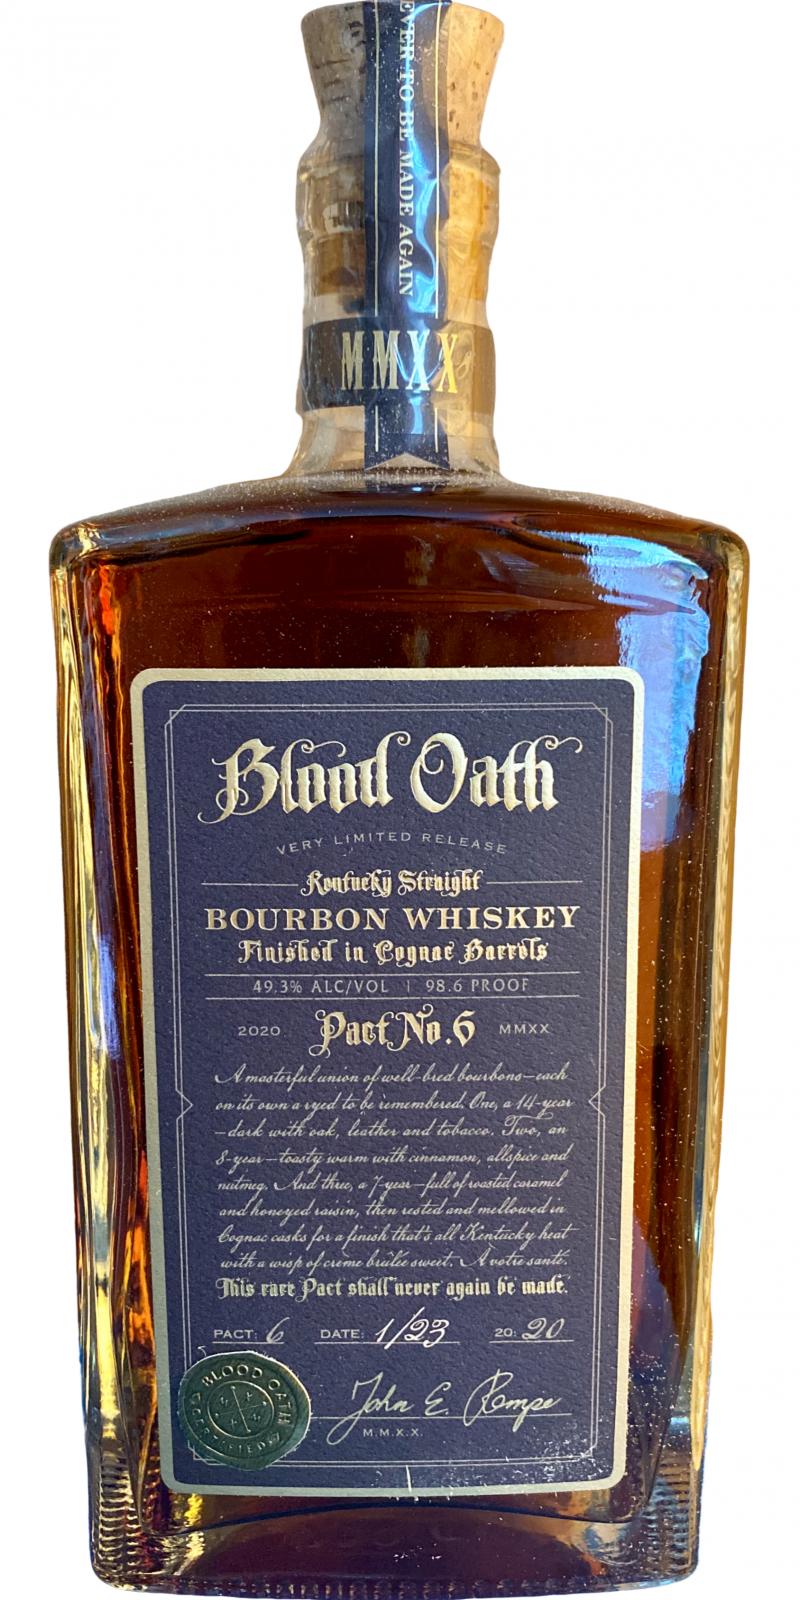 Blood Oath Pact No. 6 Finished in Cognac Barrels 49.3% 700ml